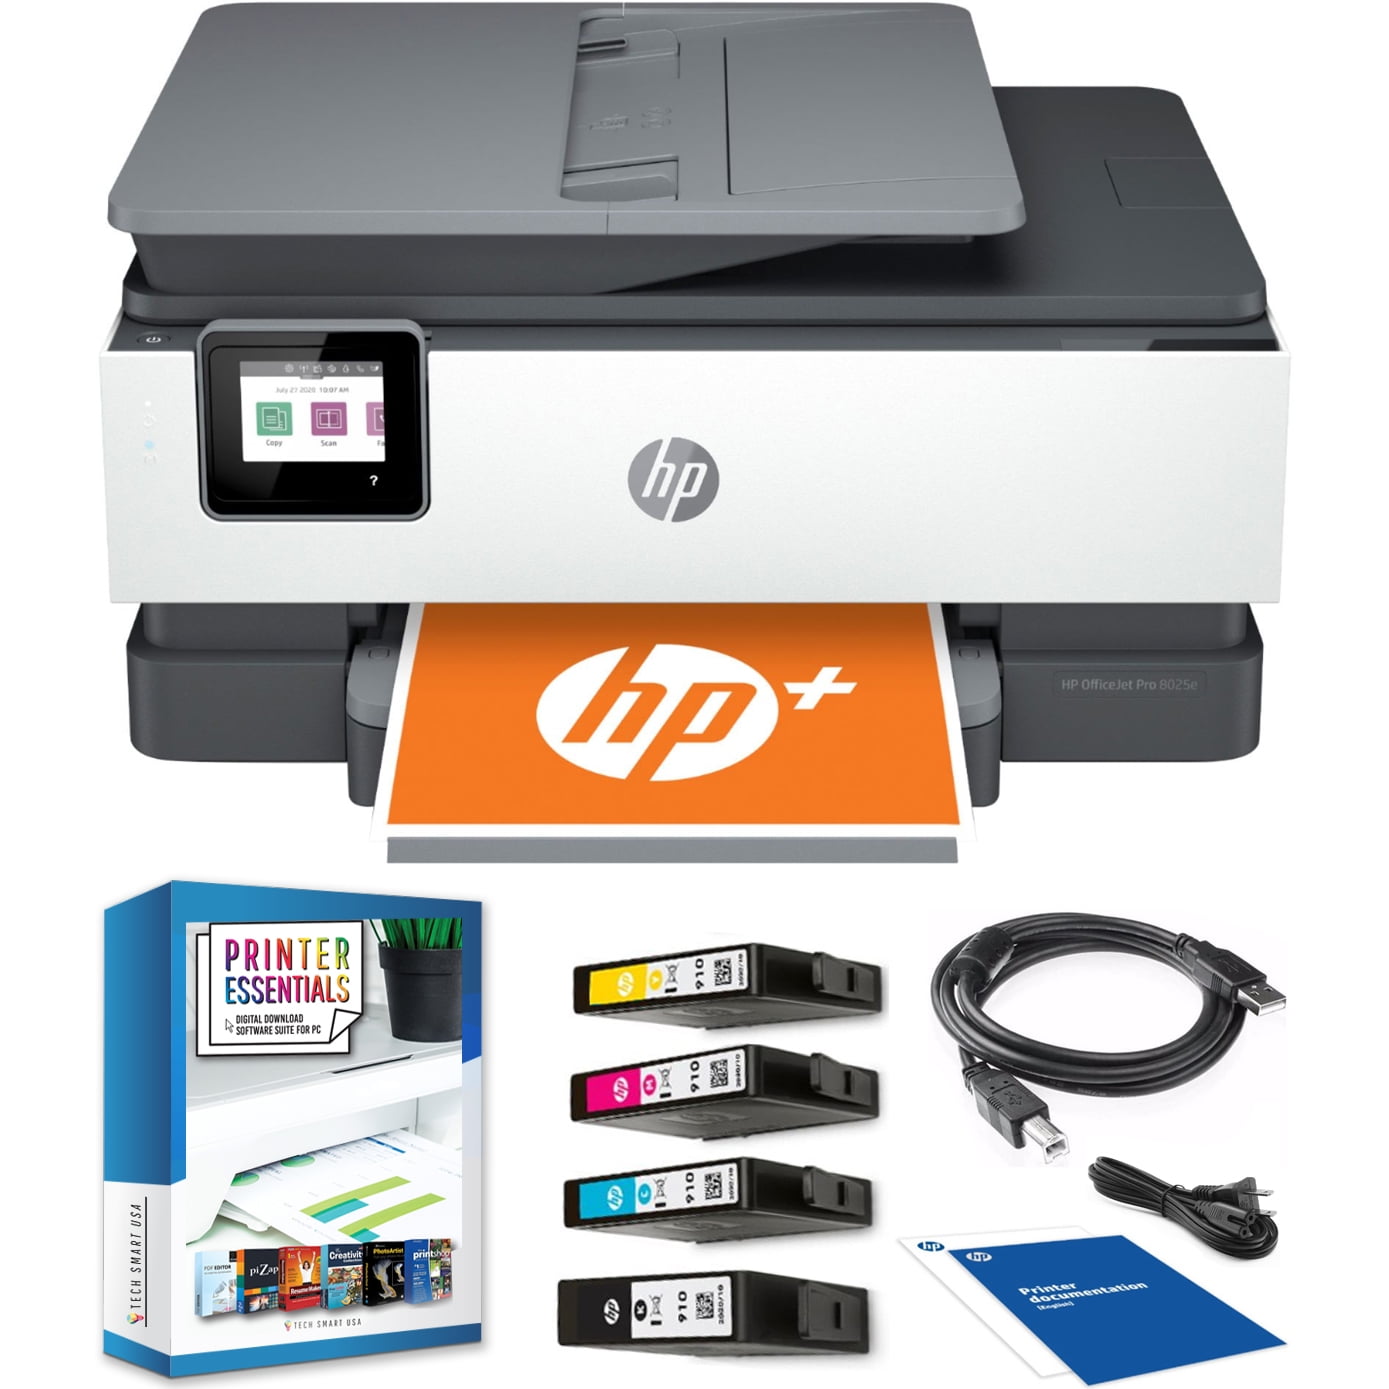 HP OfficeJet Pro 8025e Wireless Smart Color Printer 1K7K3A (Renewed) Print, Scan, Fax, 6mths Instant Ink with HP+ Bundle with DGE Cable + Small Business Productivity Software - Walmart.com